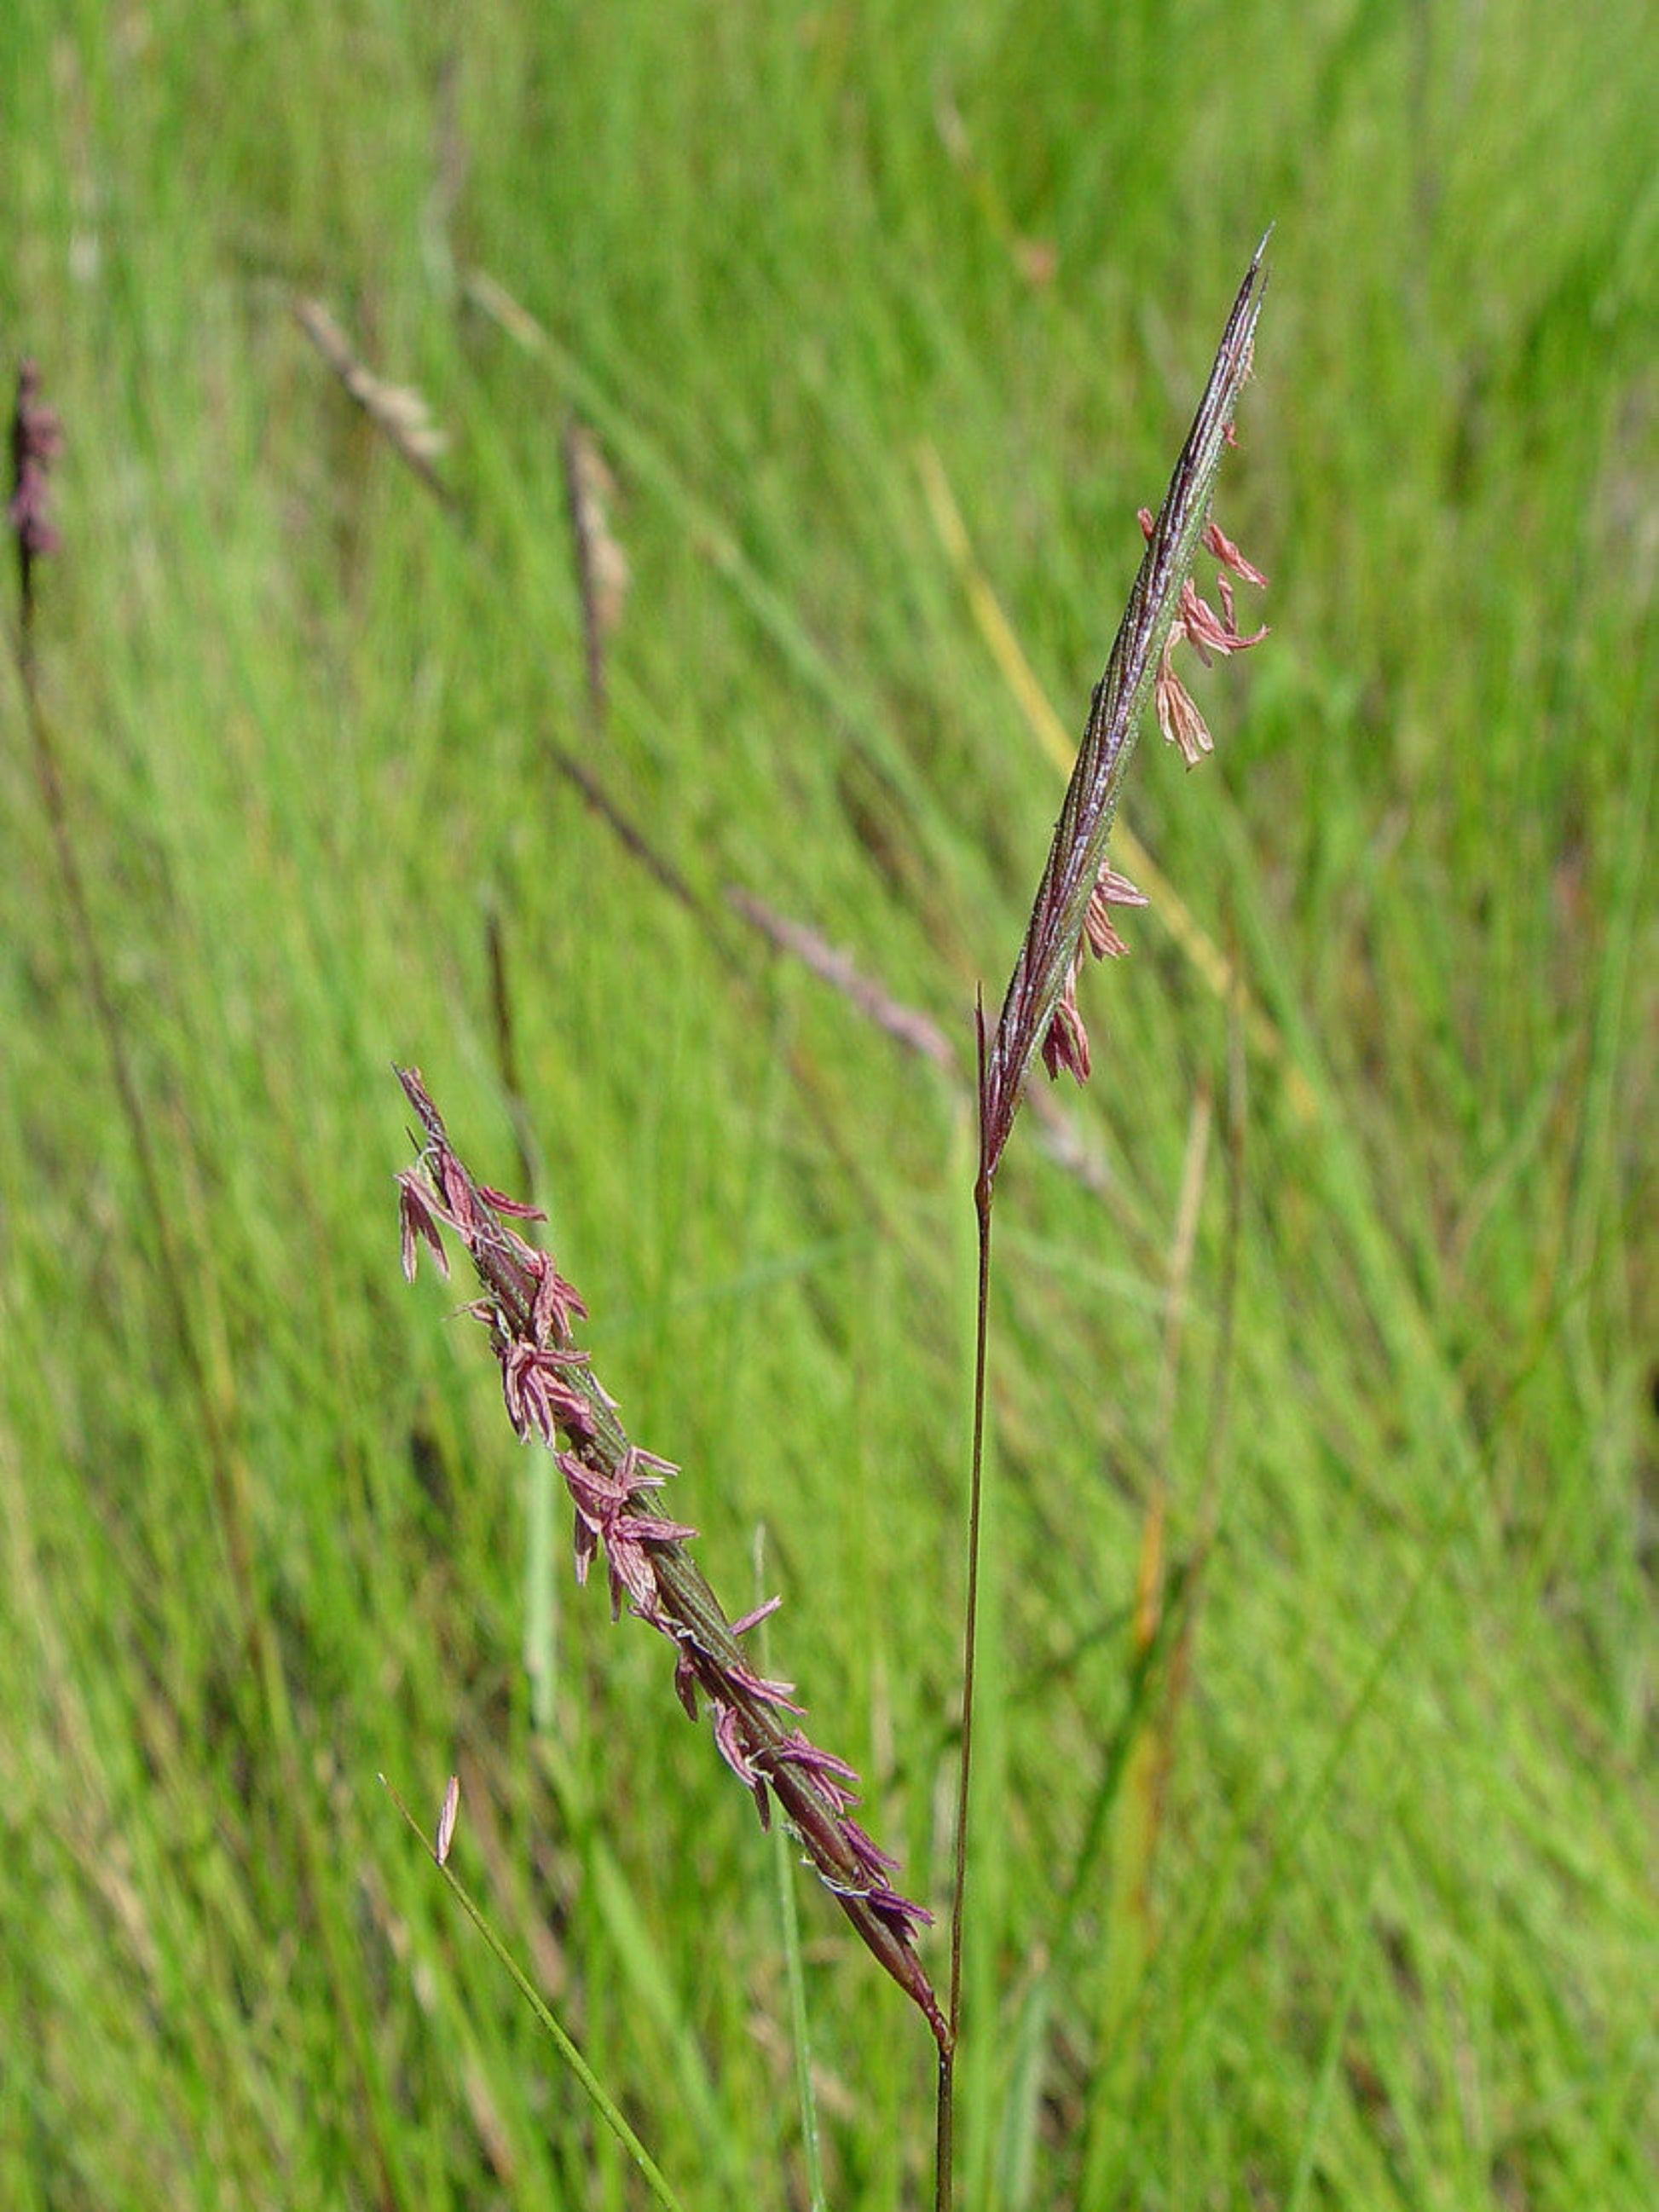 spartina patens grass is the host plant for Saltmarsh Skipper butterfly